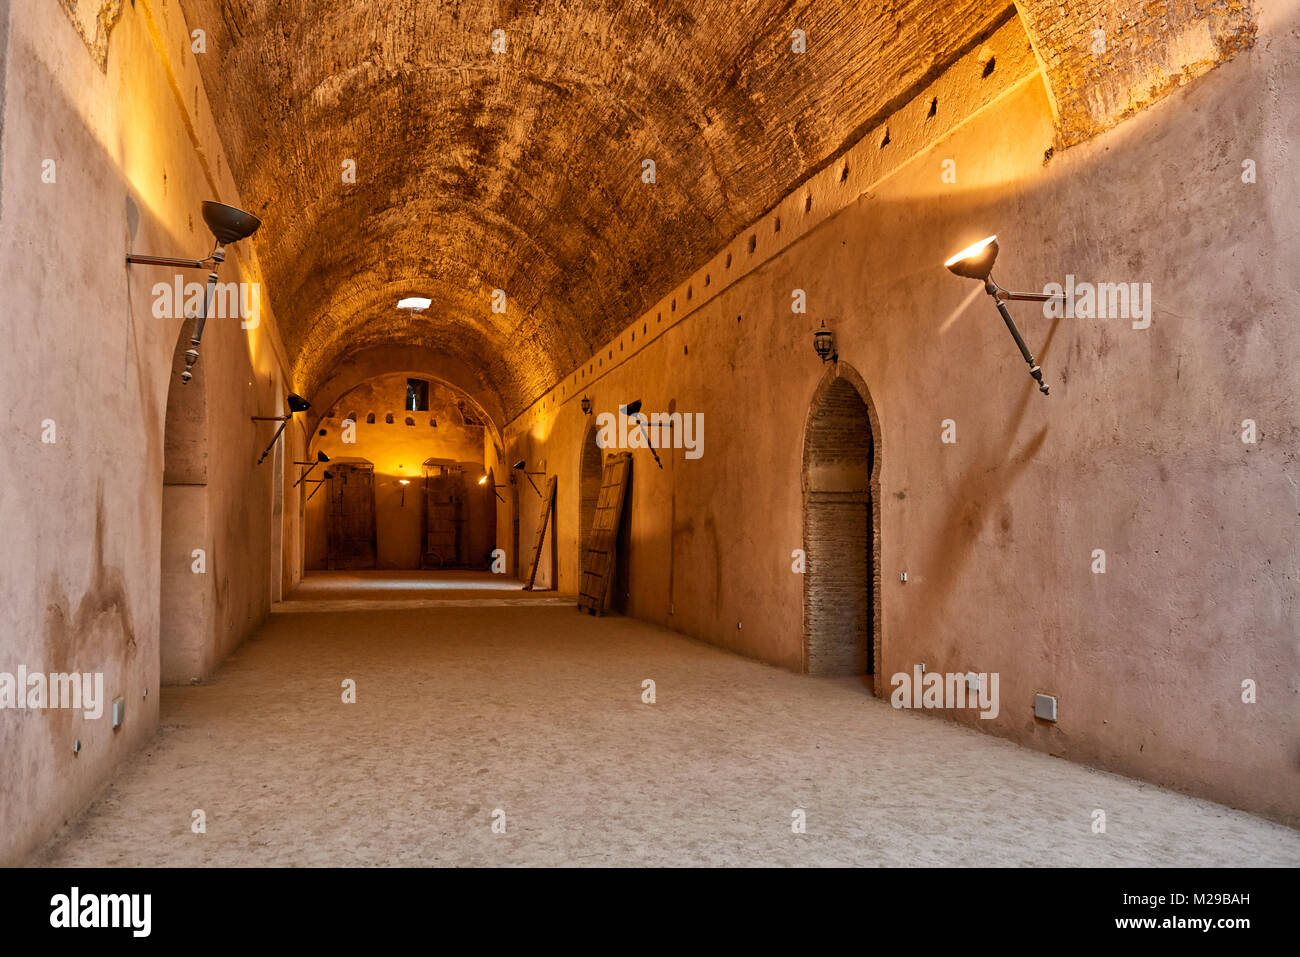 Heri es-Souani, Imperial Royal Stables, Meknes, Morocco, Africa Stock Photo